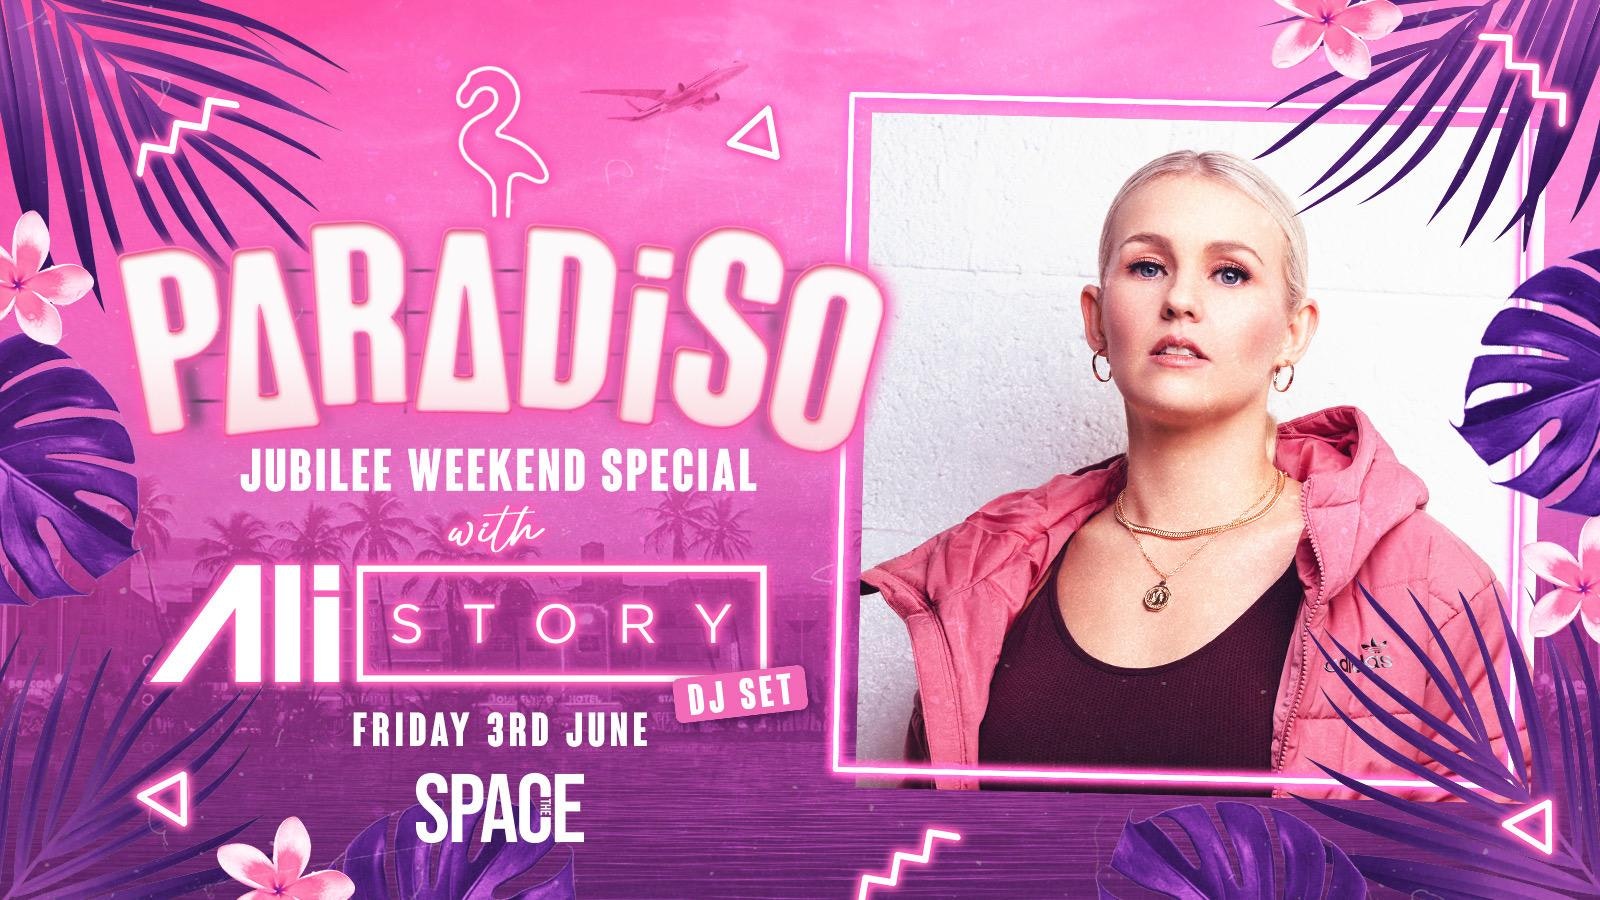 Paradiso Fridays at Space Jubilee Bank Holiday Special with Ali Story – 3rd June